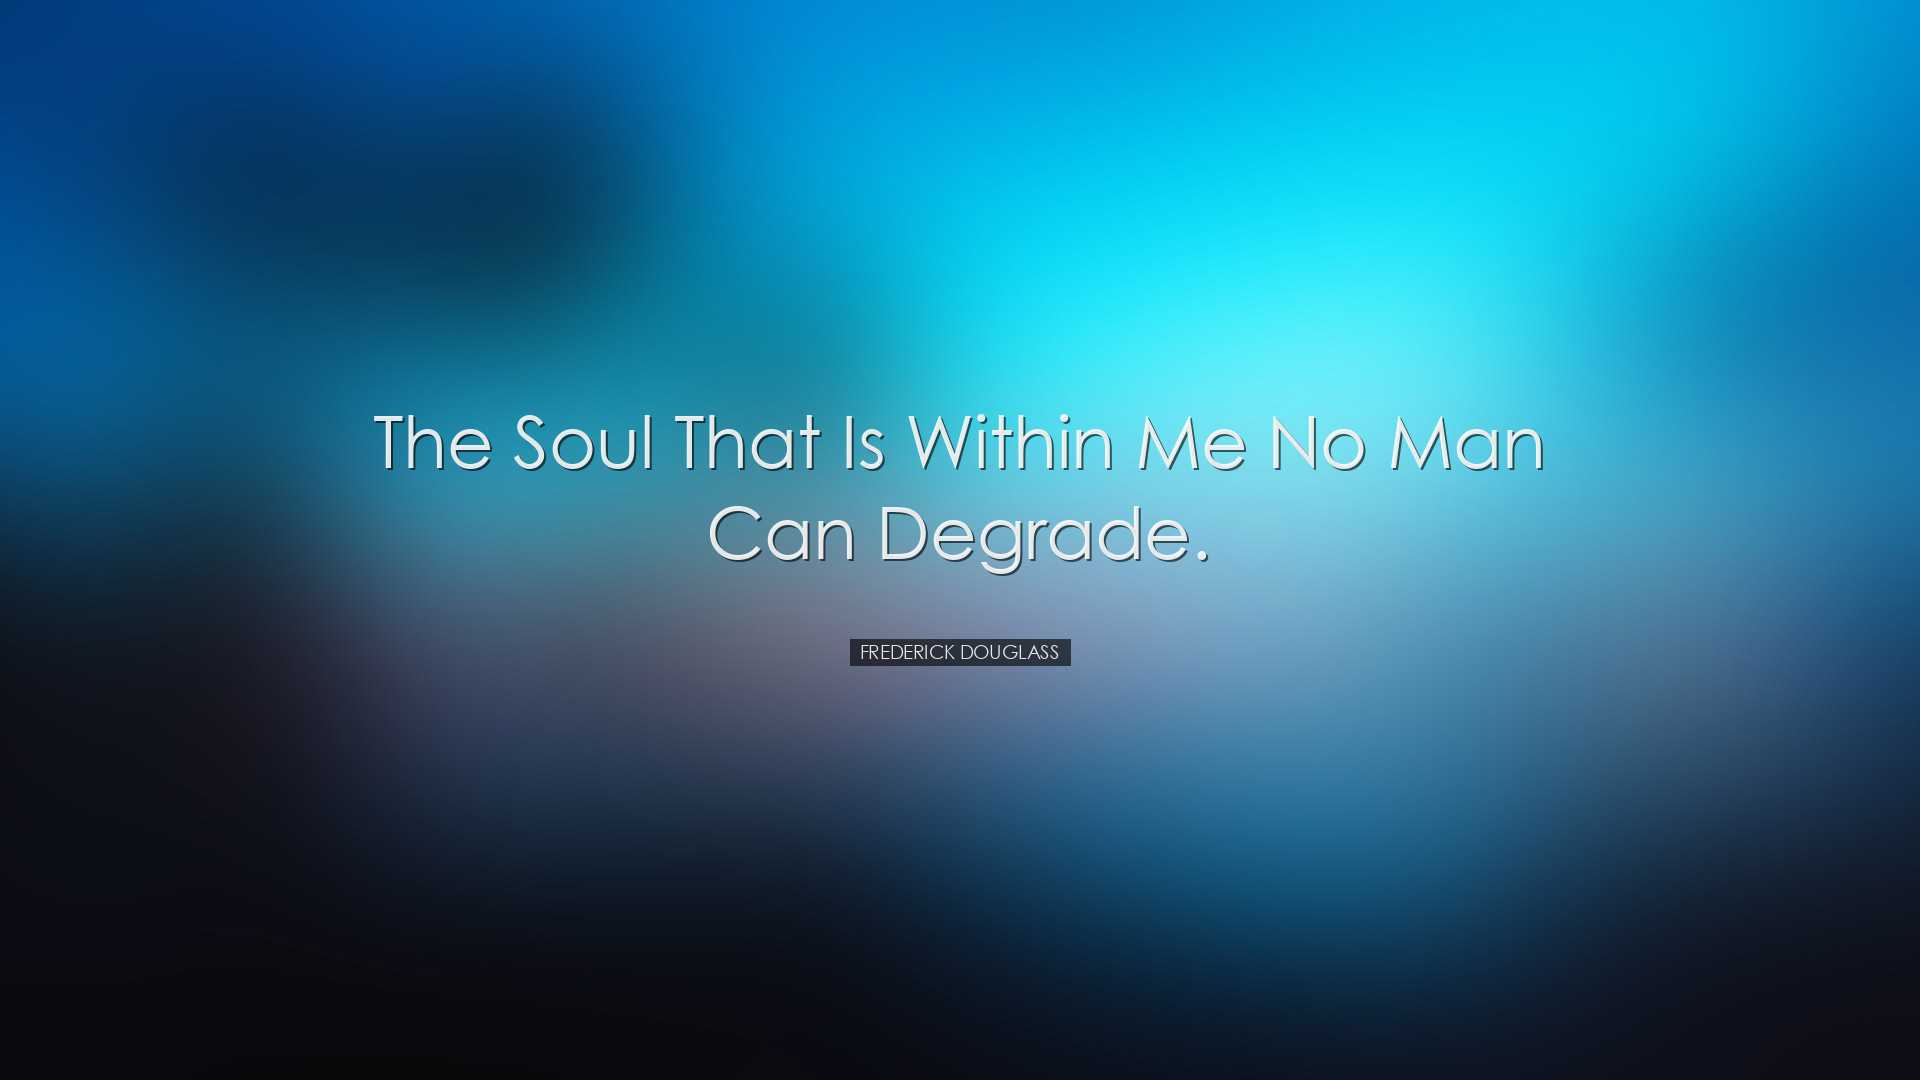 The soul that is within me no man can degrade. - Frederick Douglas